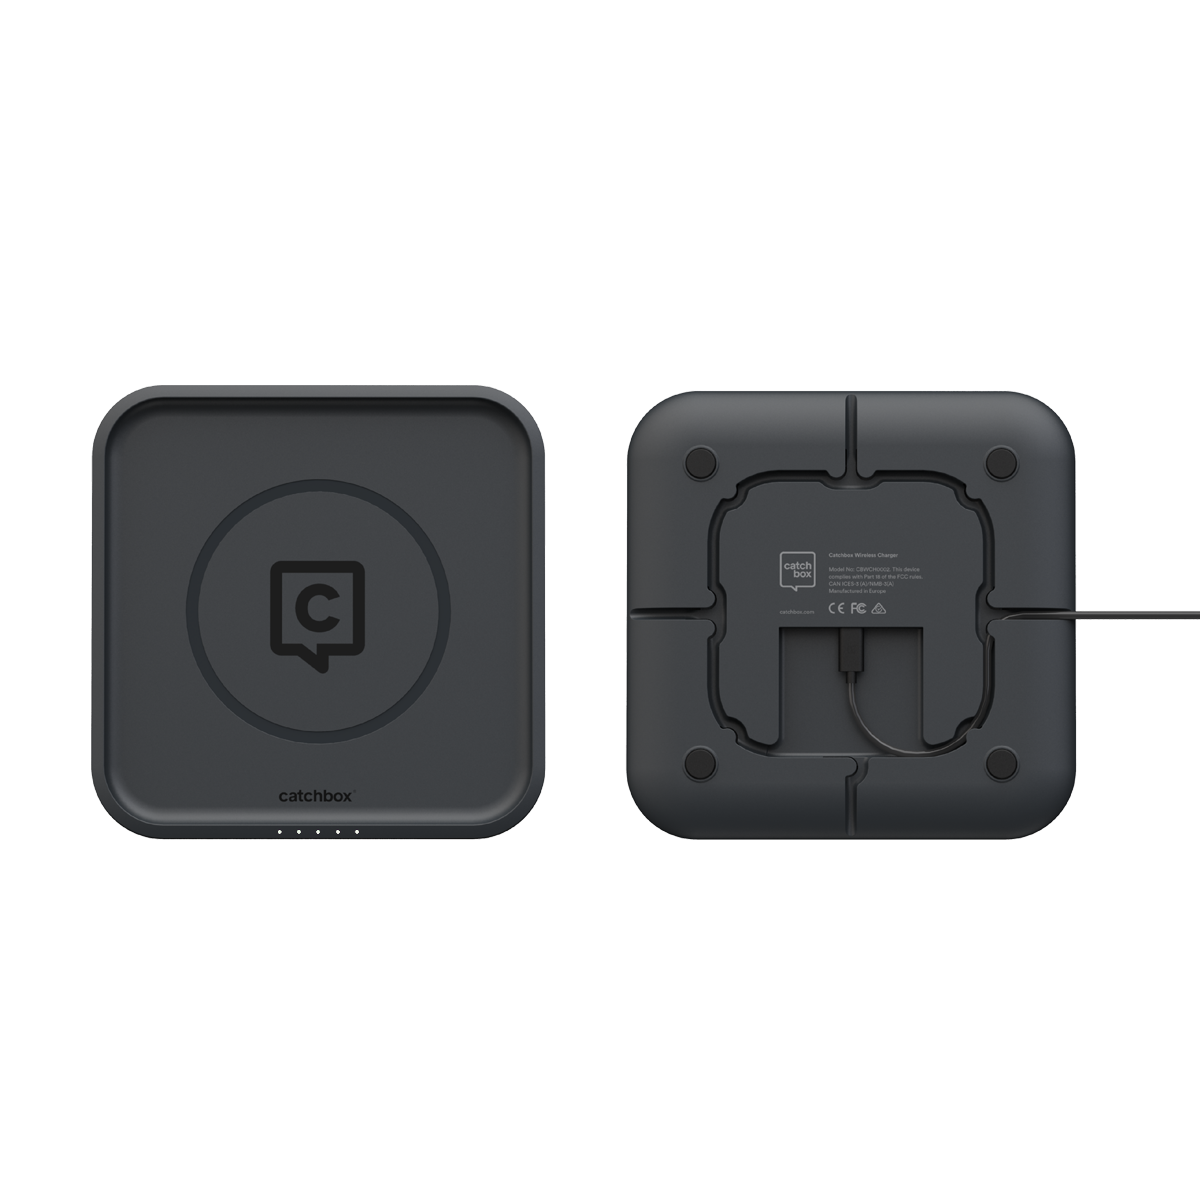 Catchbox Plus Bundle - 1 Cube Throw Microphone Grey - 1 Clip Wireless Lapel Microphone Dark Grey - with Wireless Charger - with Dock Charging Station